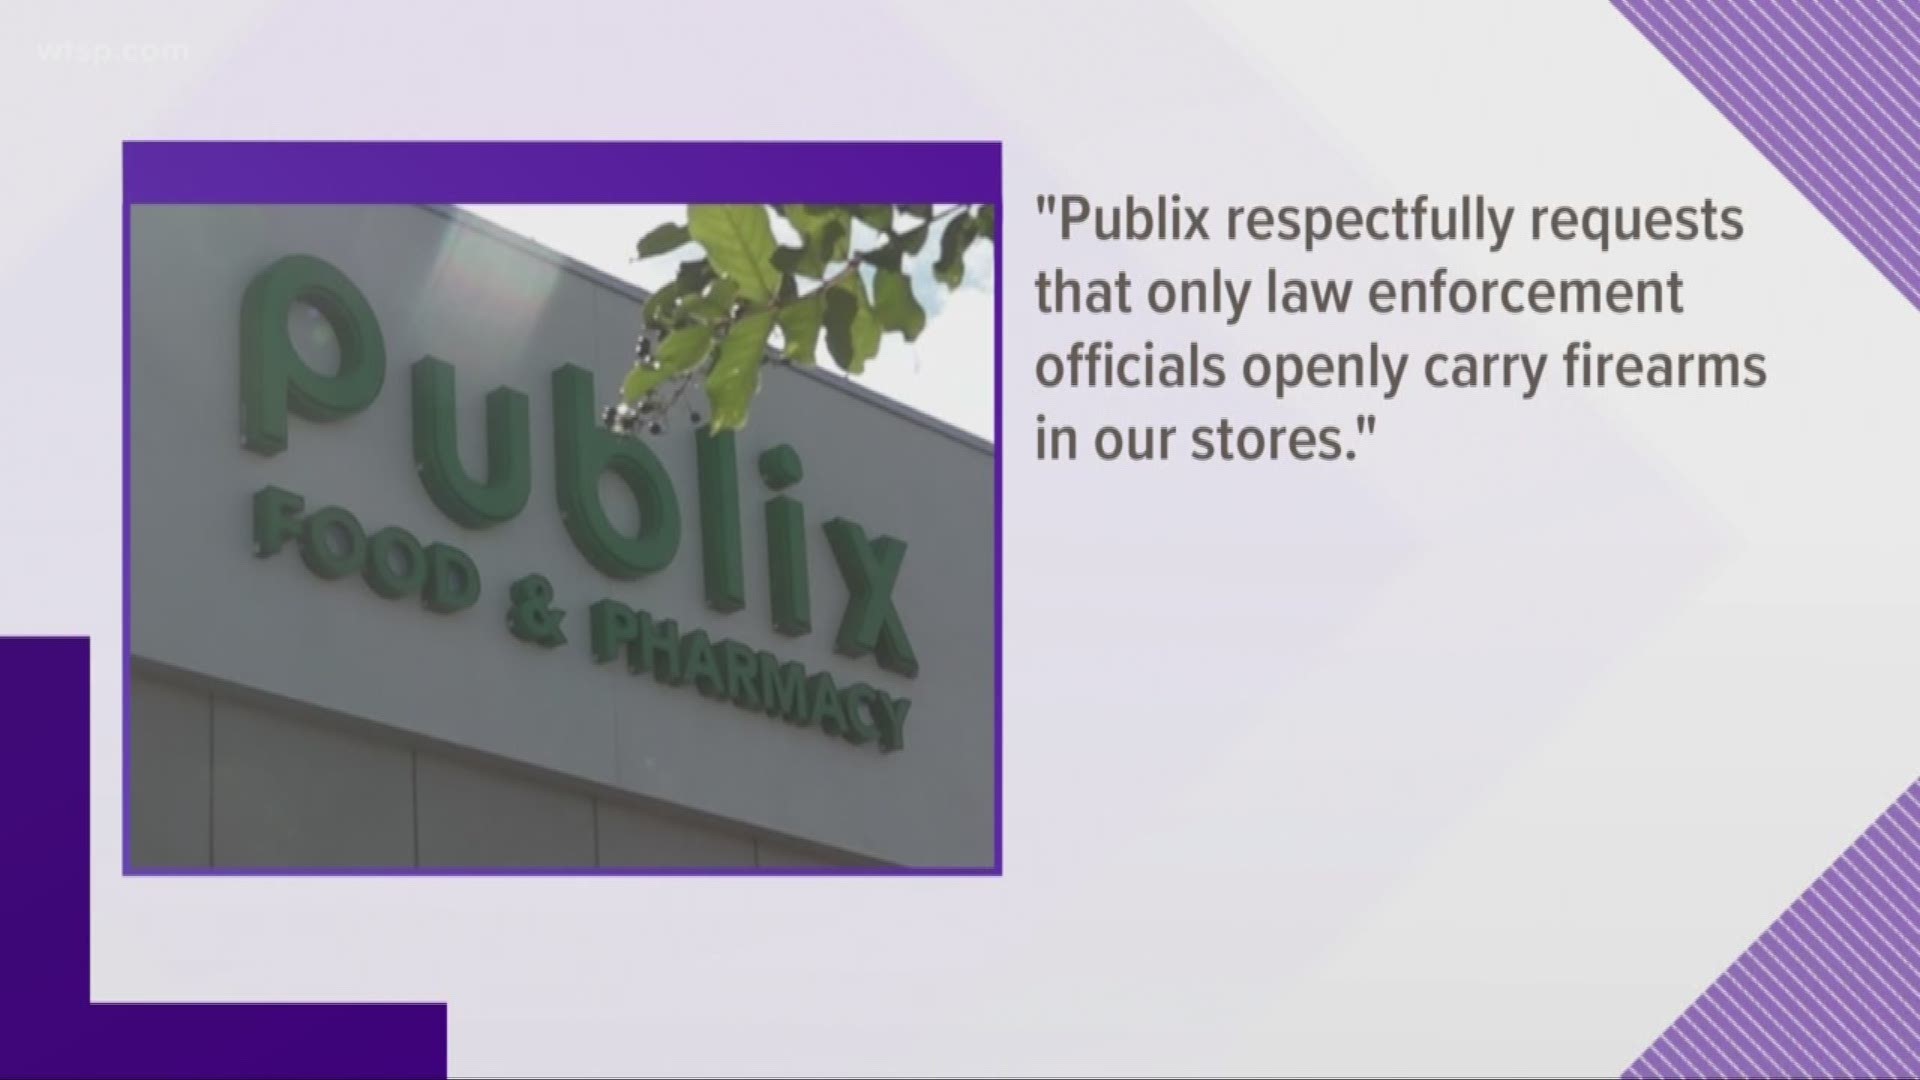 Publix has followed several other retails in asking customers not to openly carry guns in its stores.

"Publix respectfully requests that only law enforcement officials openly carry firearms in our stores," a spokesperson said in a statement to 10News.